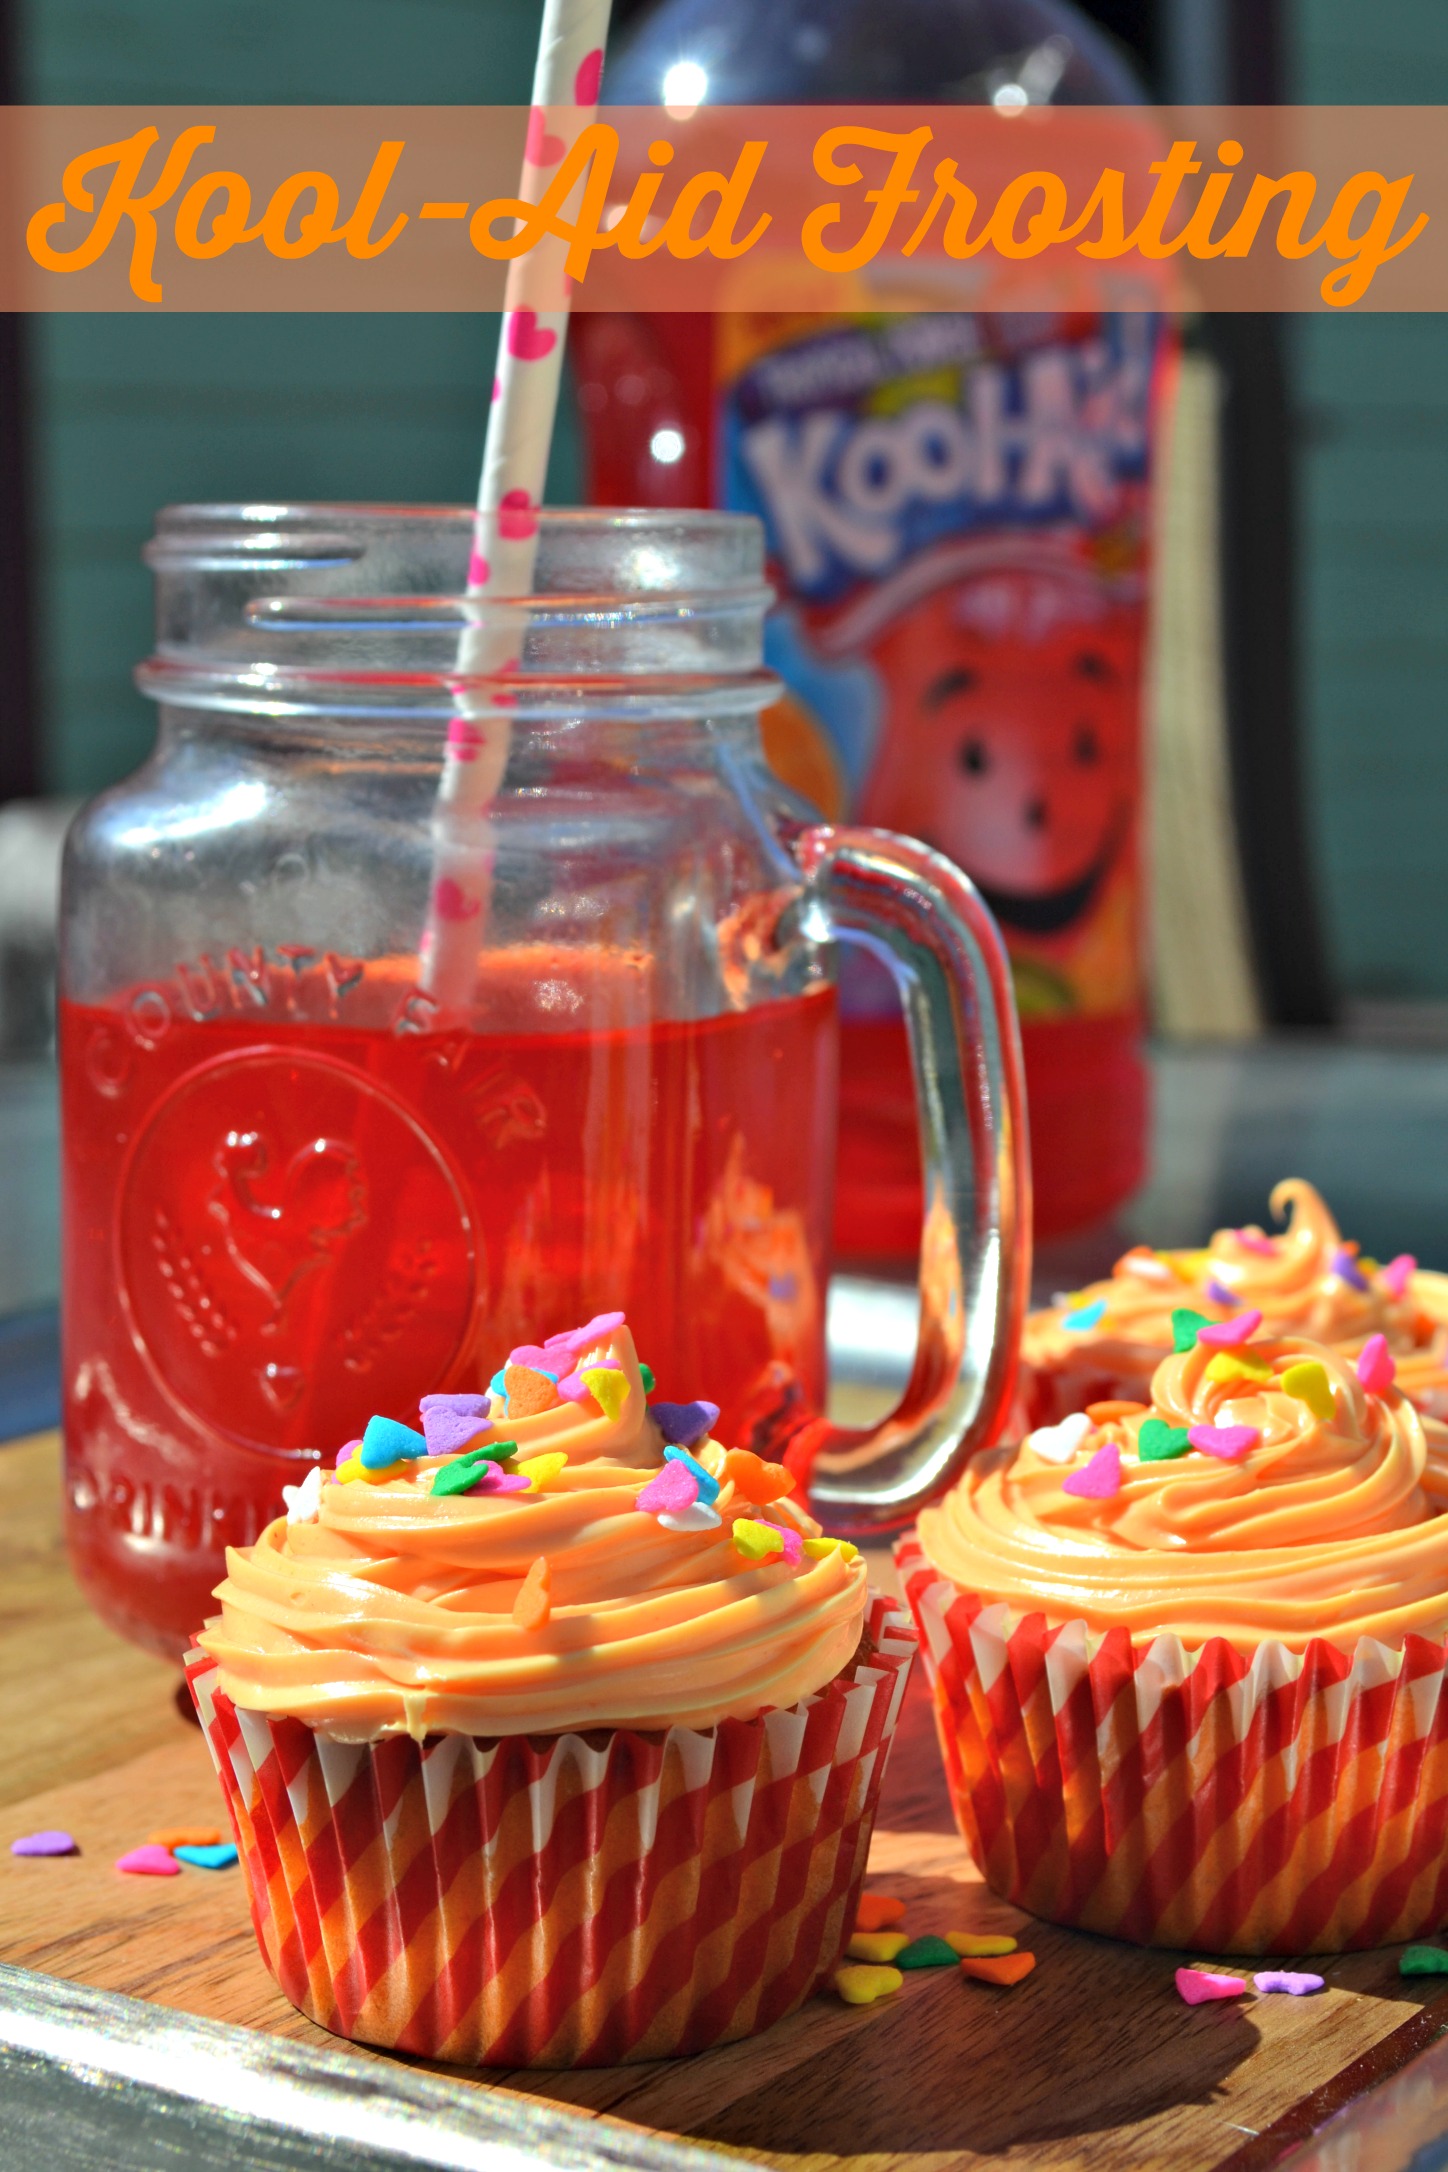 Easy Frosted Cupcakes with Kool-Aid - The Domestic Geek Blog